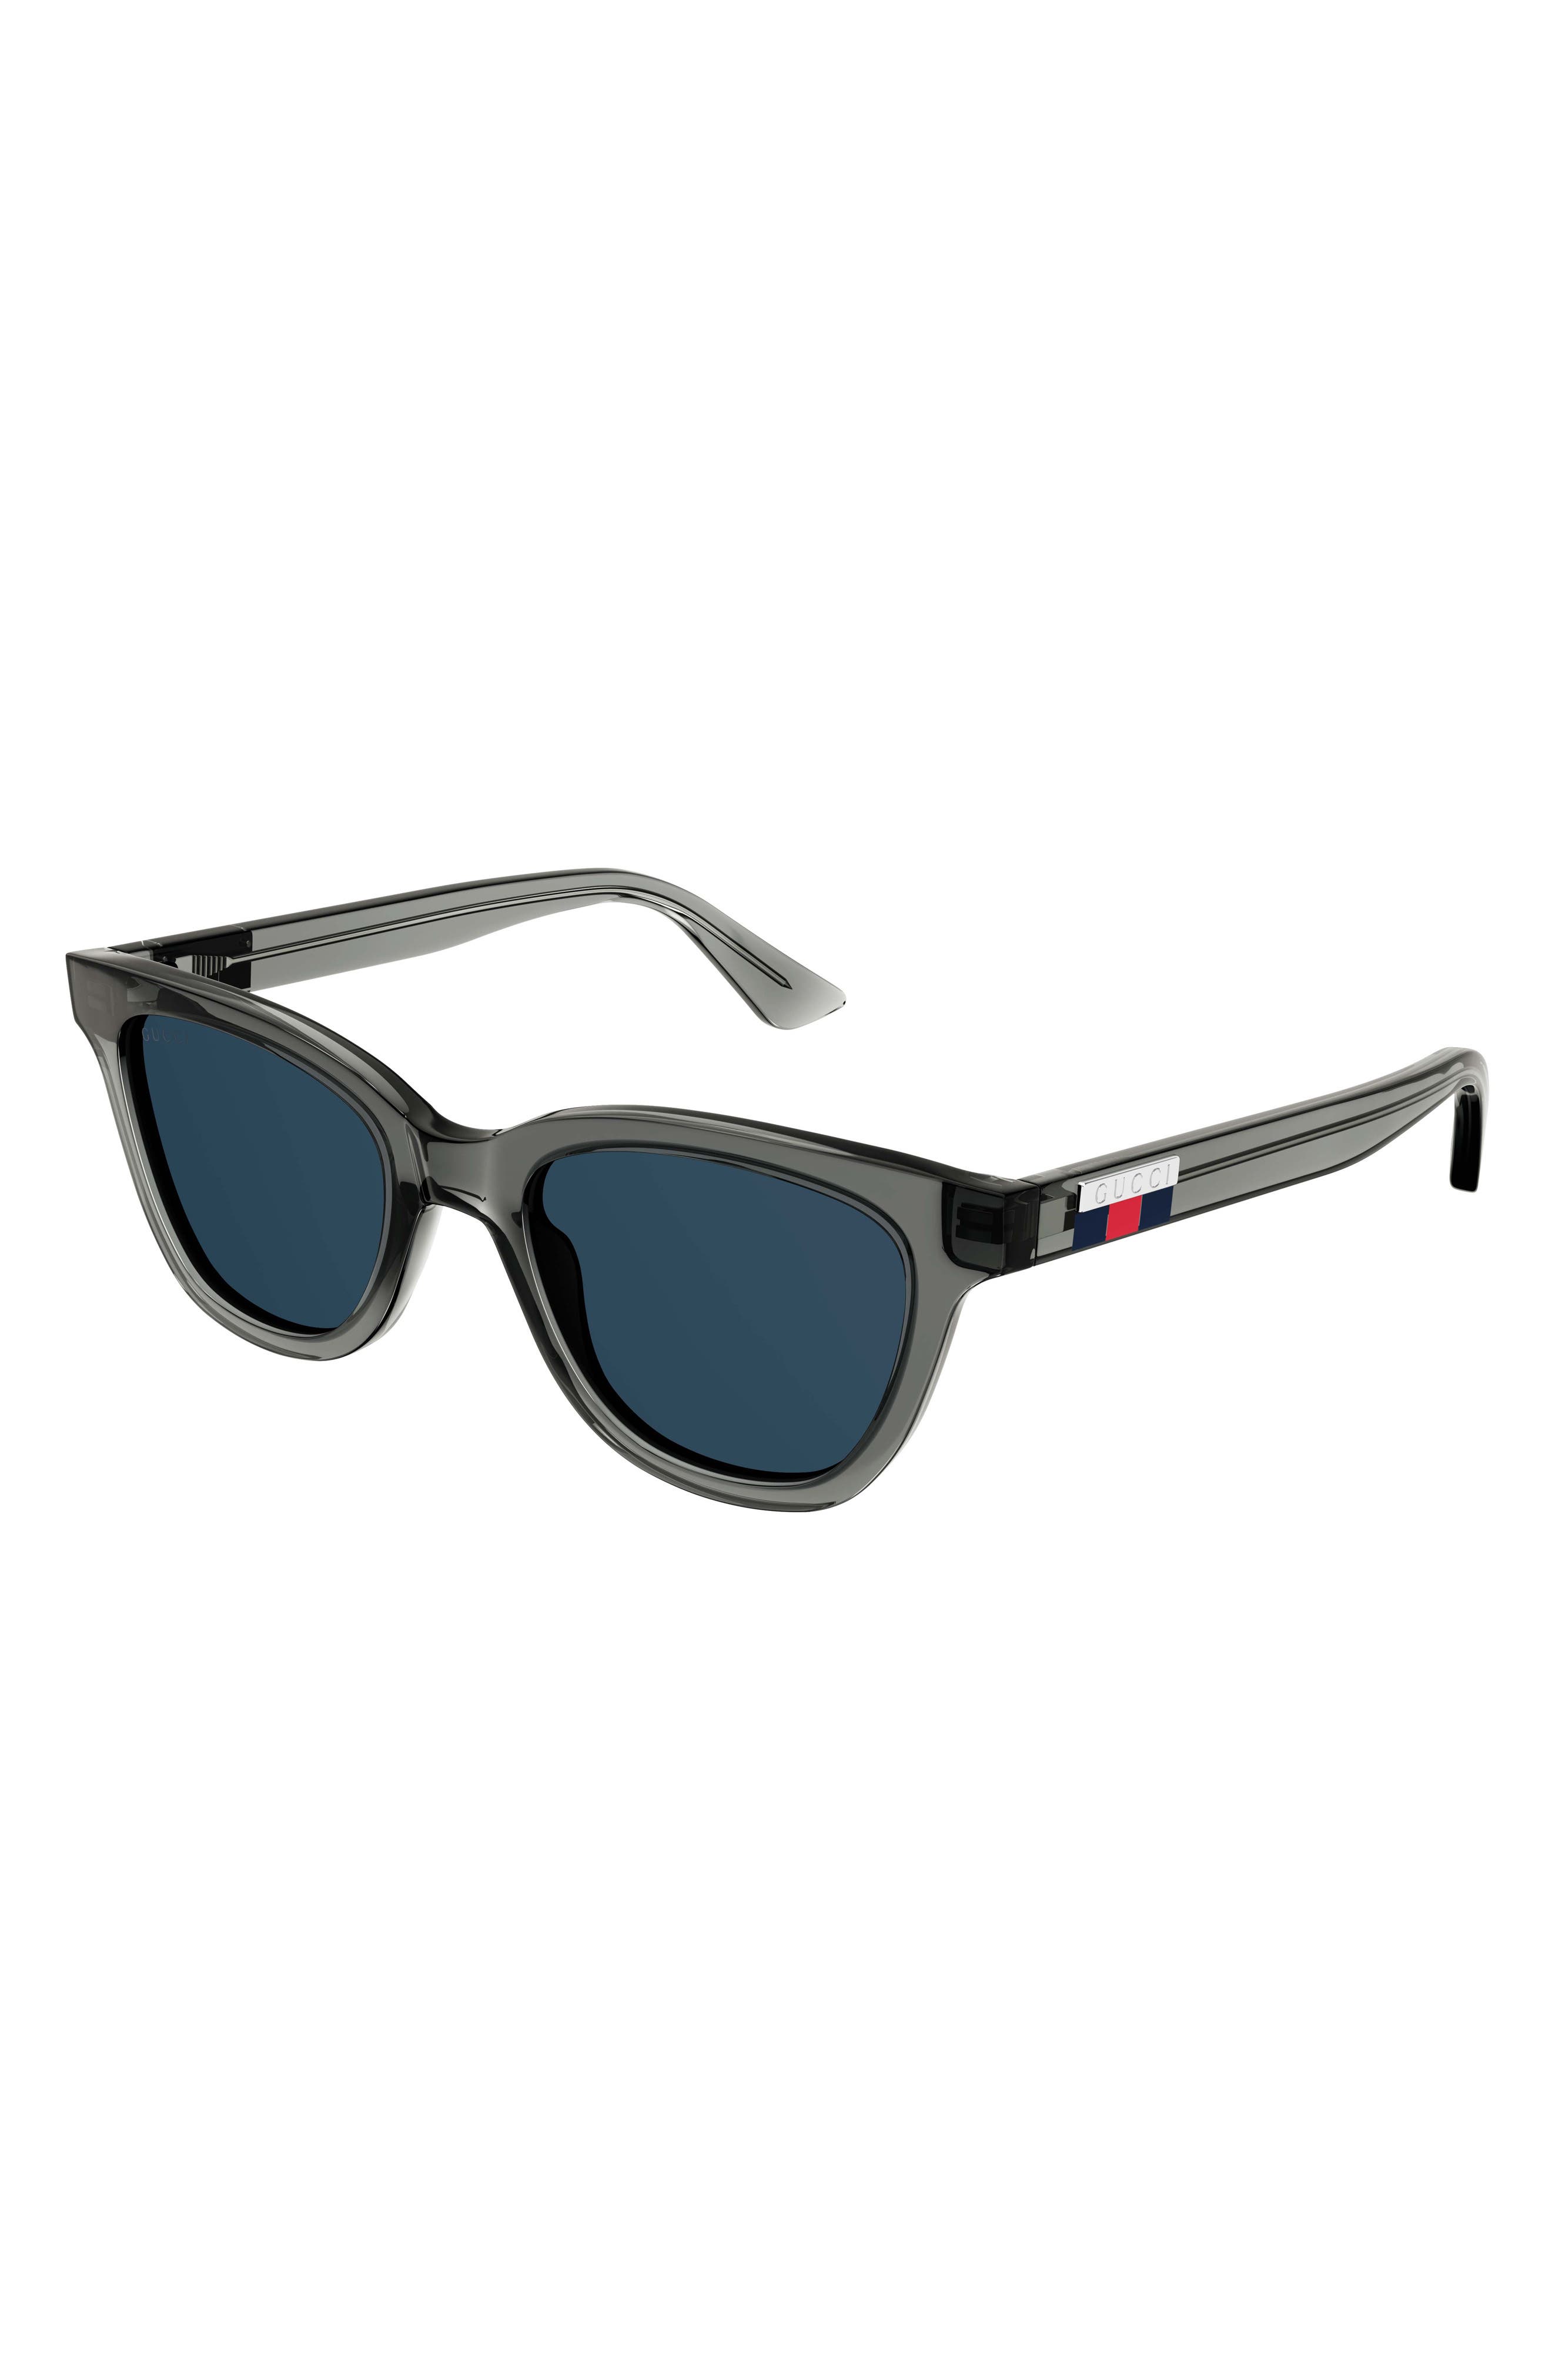 Gucci 51mm Rectangular Sunglasses in Grey at Nordstrom